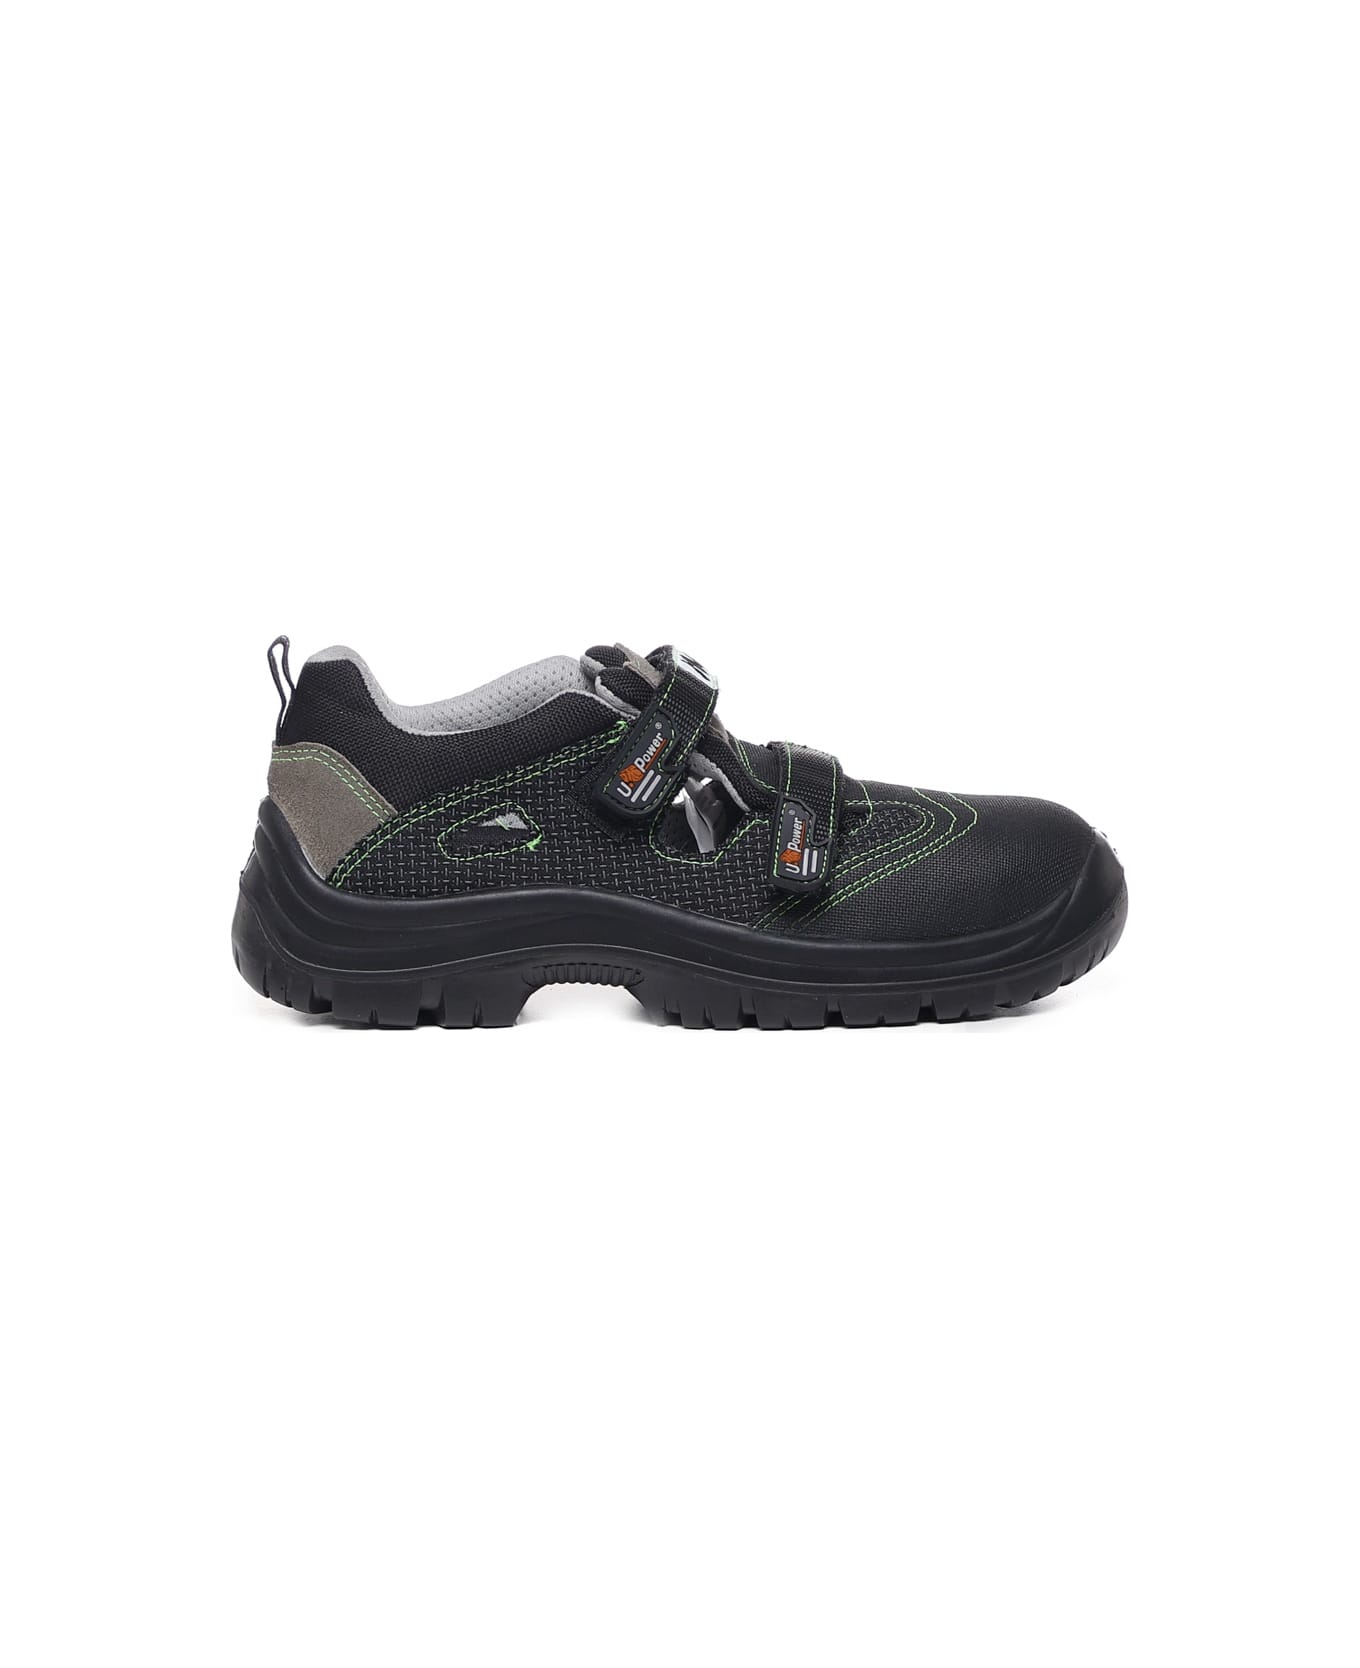 Magliano Safety Shoes In Rubber - Grey